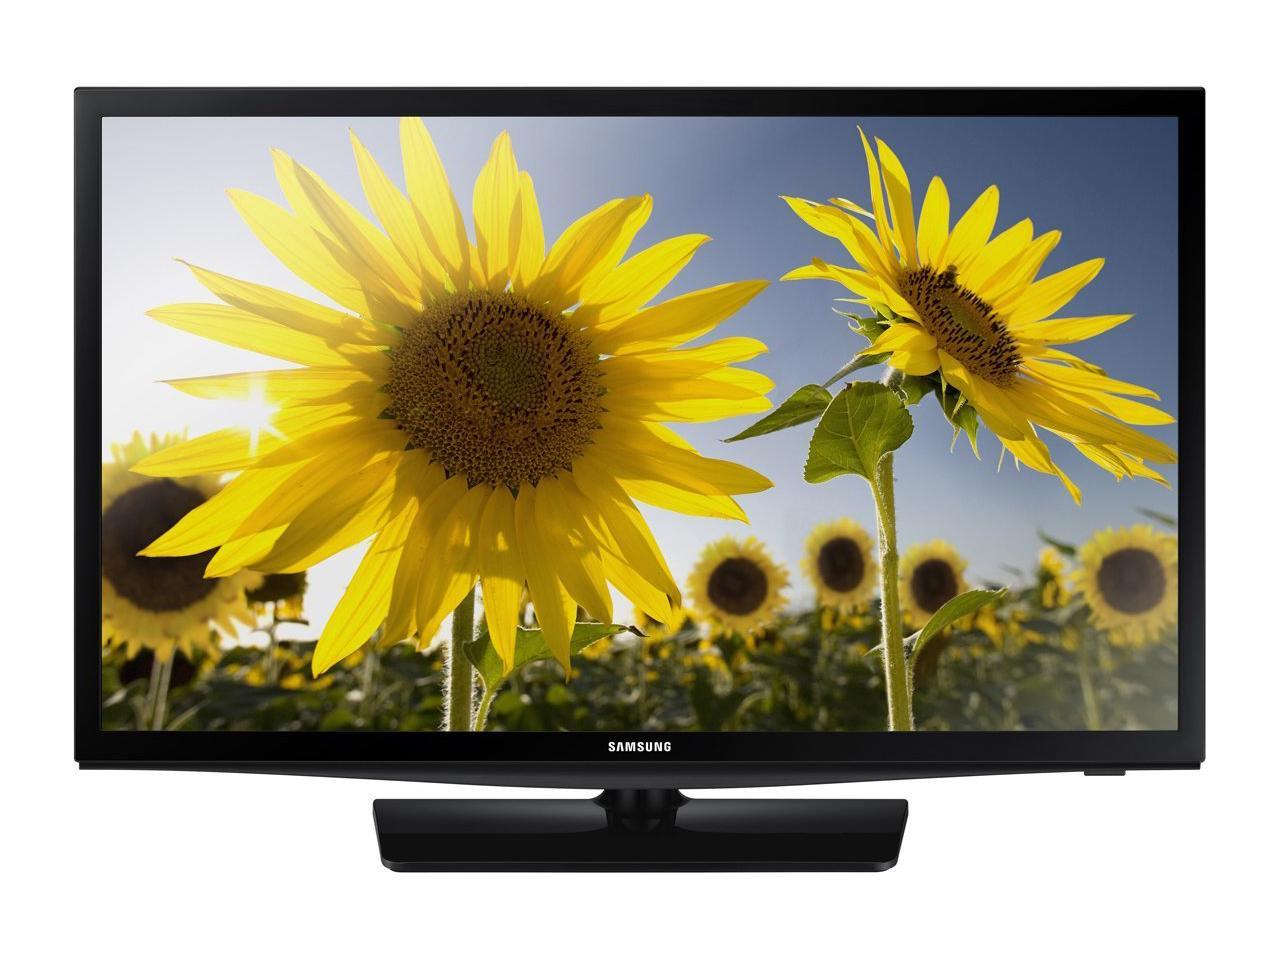 Refurbished: Samsung H4000 Series UN24H4000 24-inch LED TV, Clear Motion Rate 120, HDMI, USB